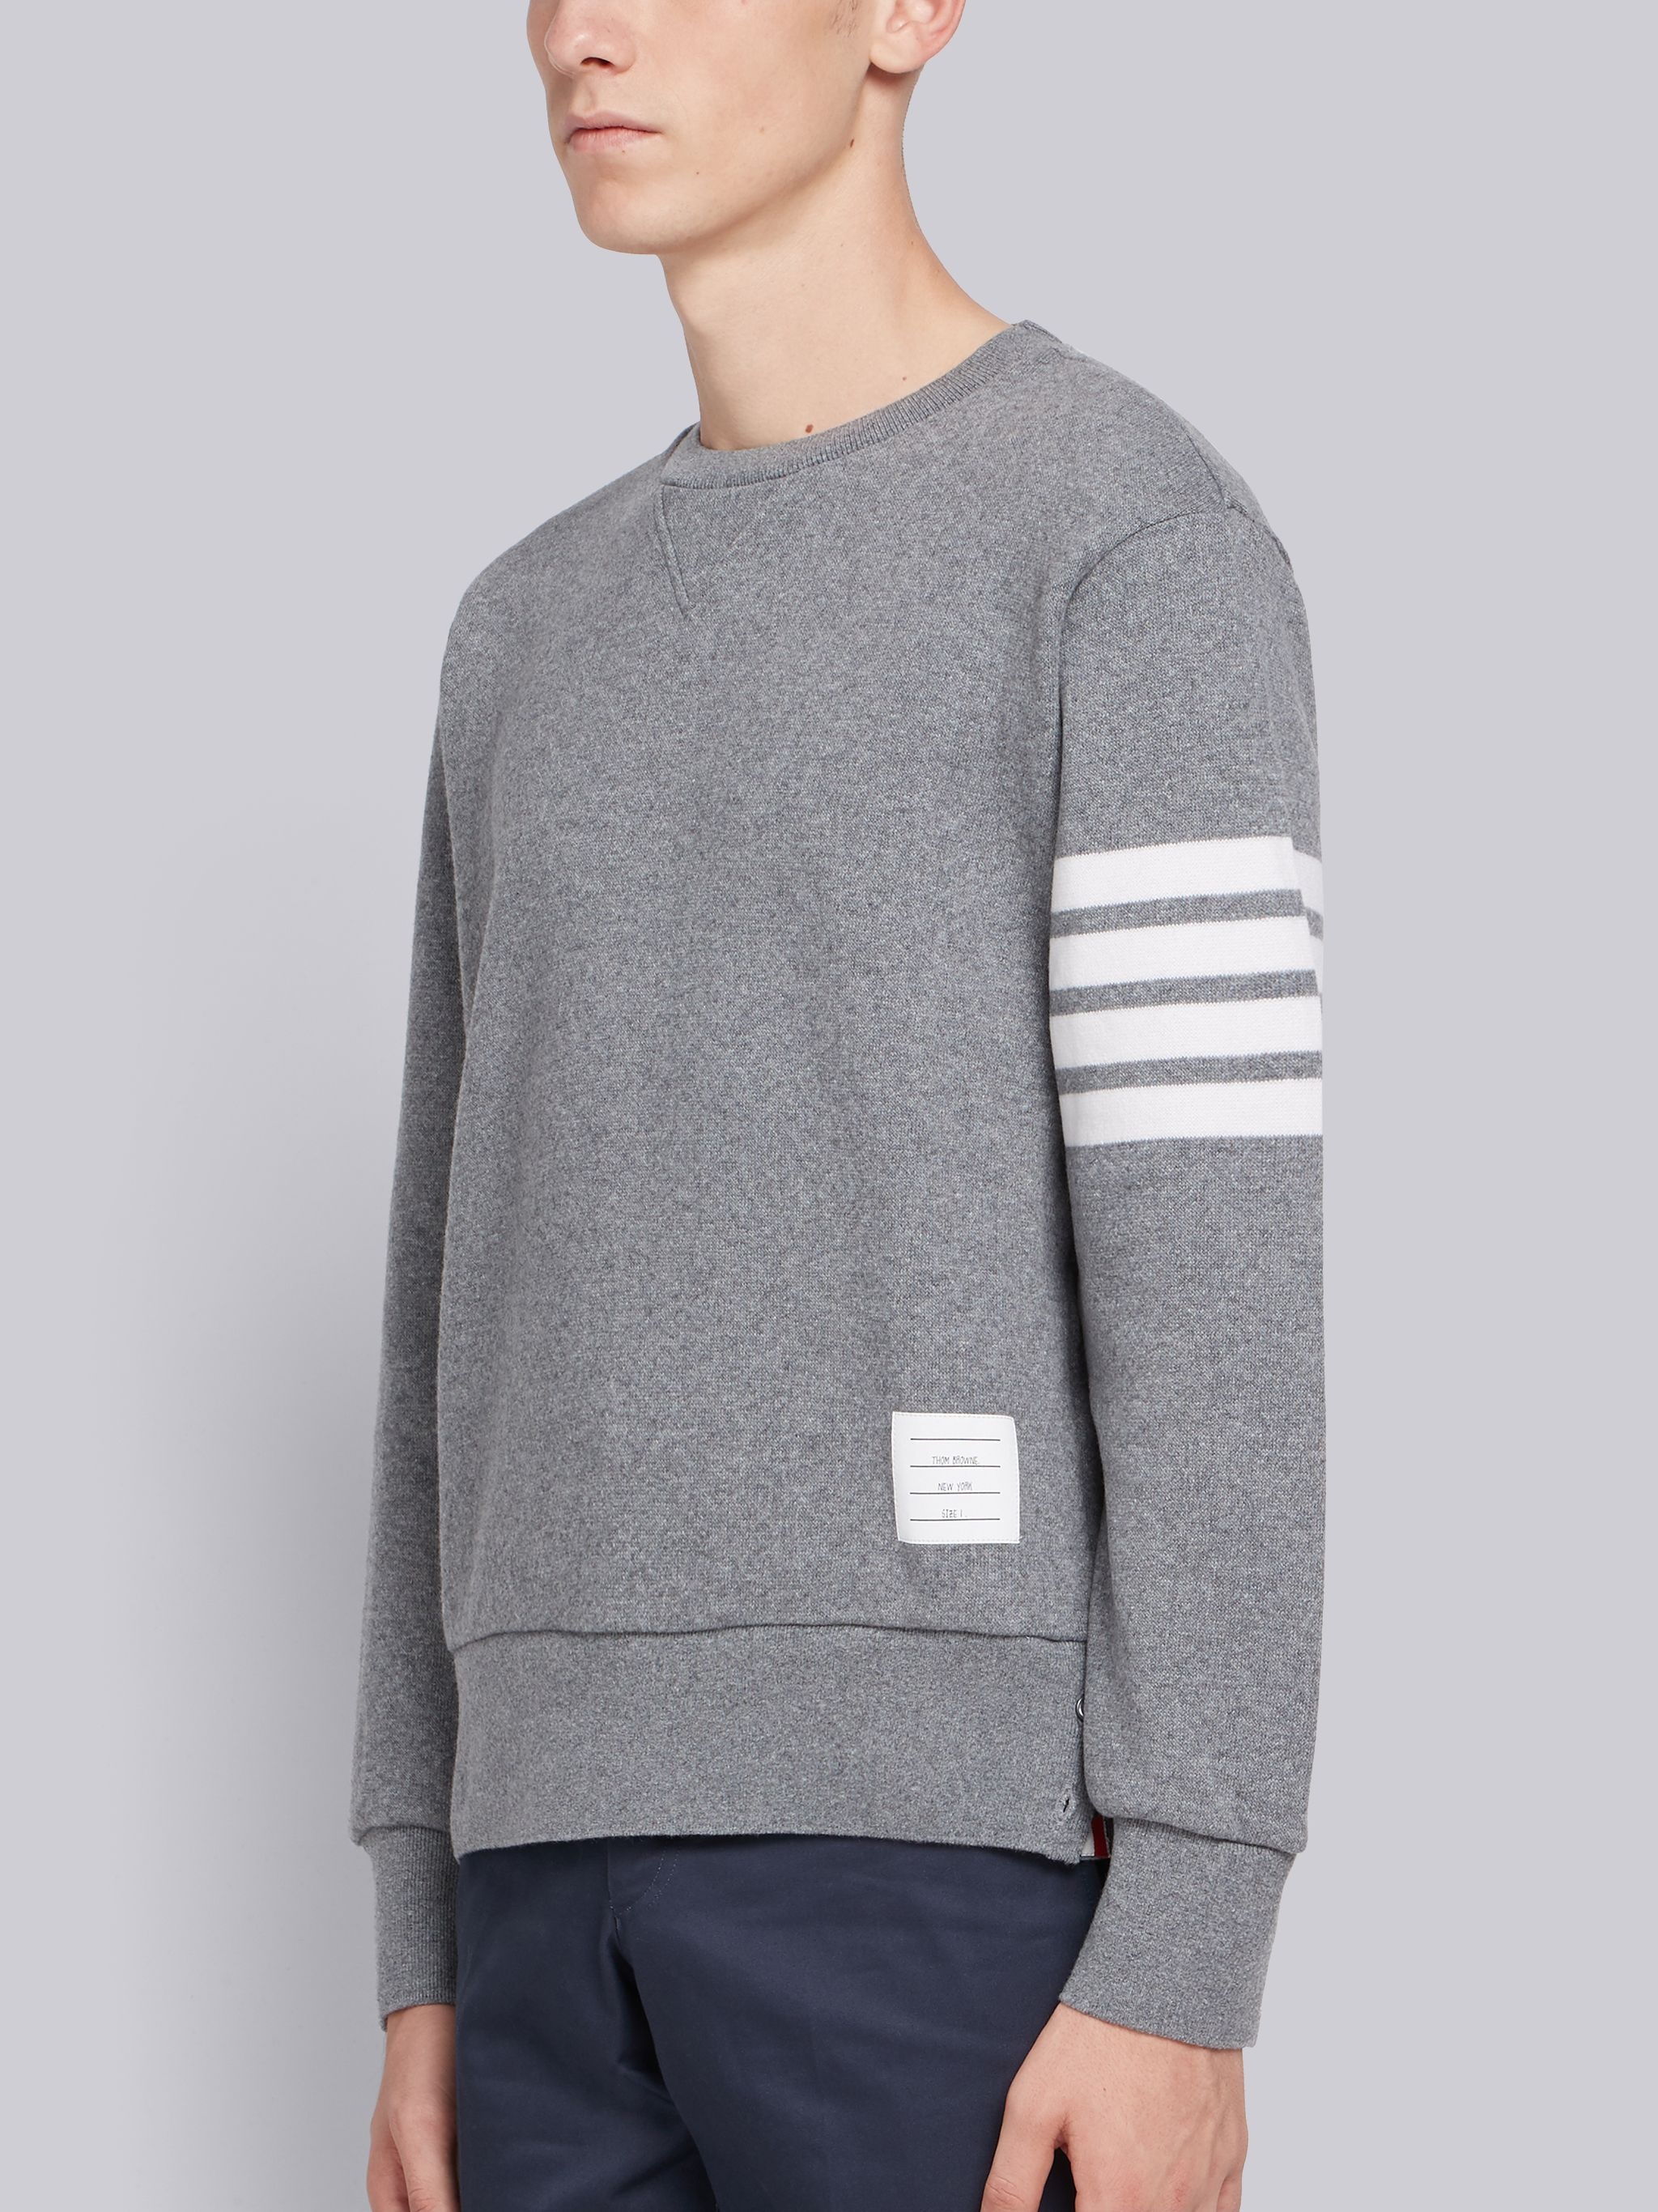 Relaxed Fit Engineered 4-Bar Stripe Cashmere Shell Sweatshirt - 2